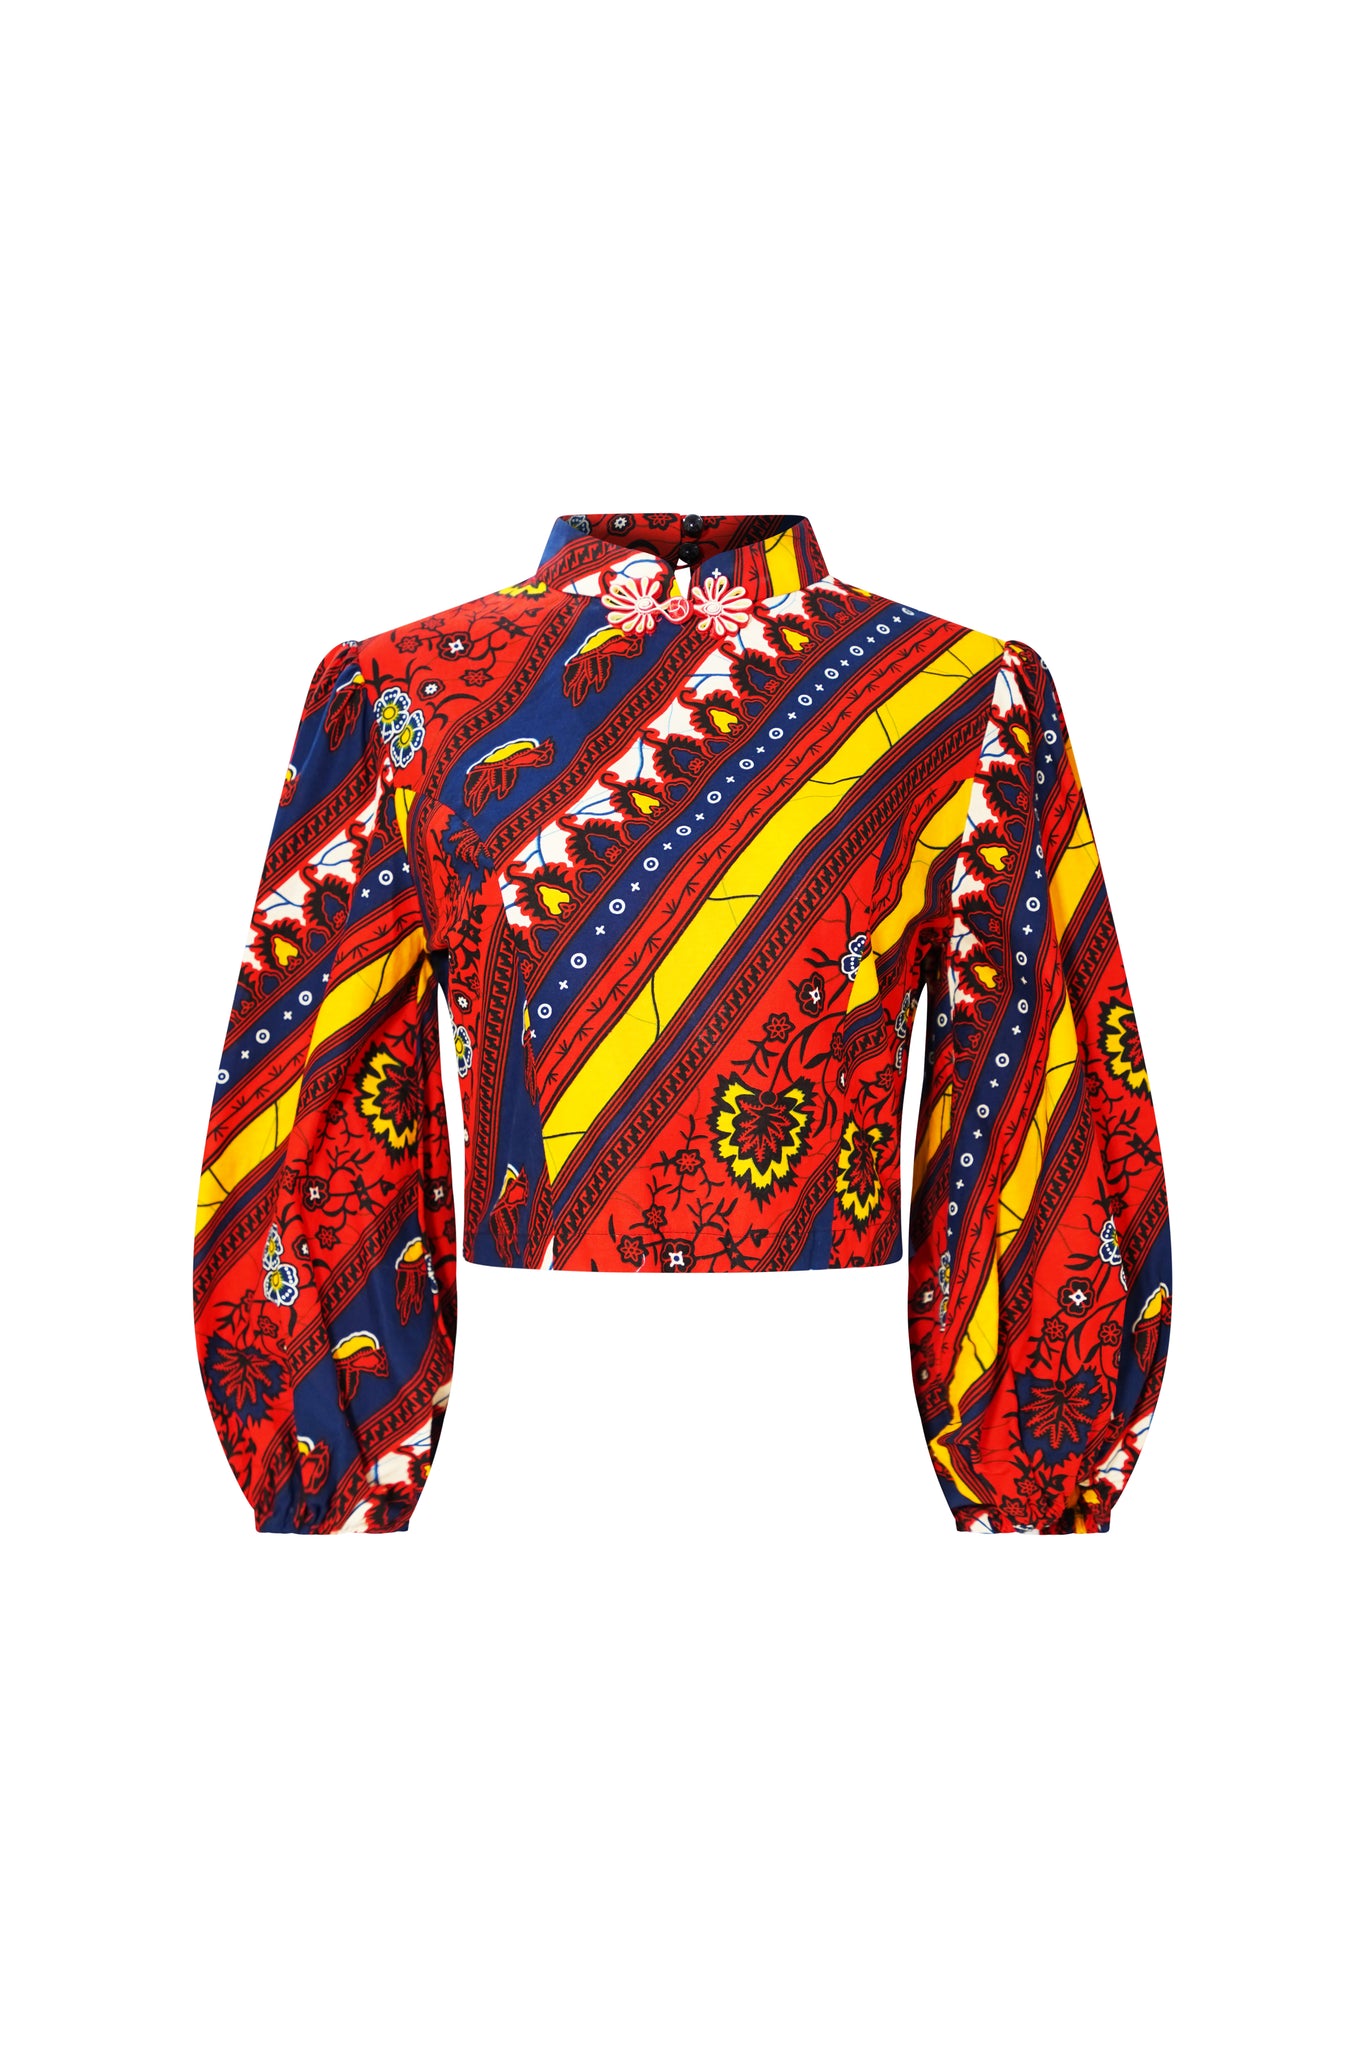 Kehinde Puffy Sleeves Top - Red Blue and Yellow African Ankara Wax Cotton Print